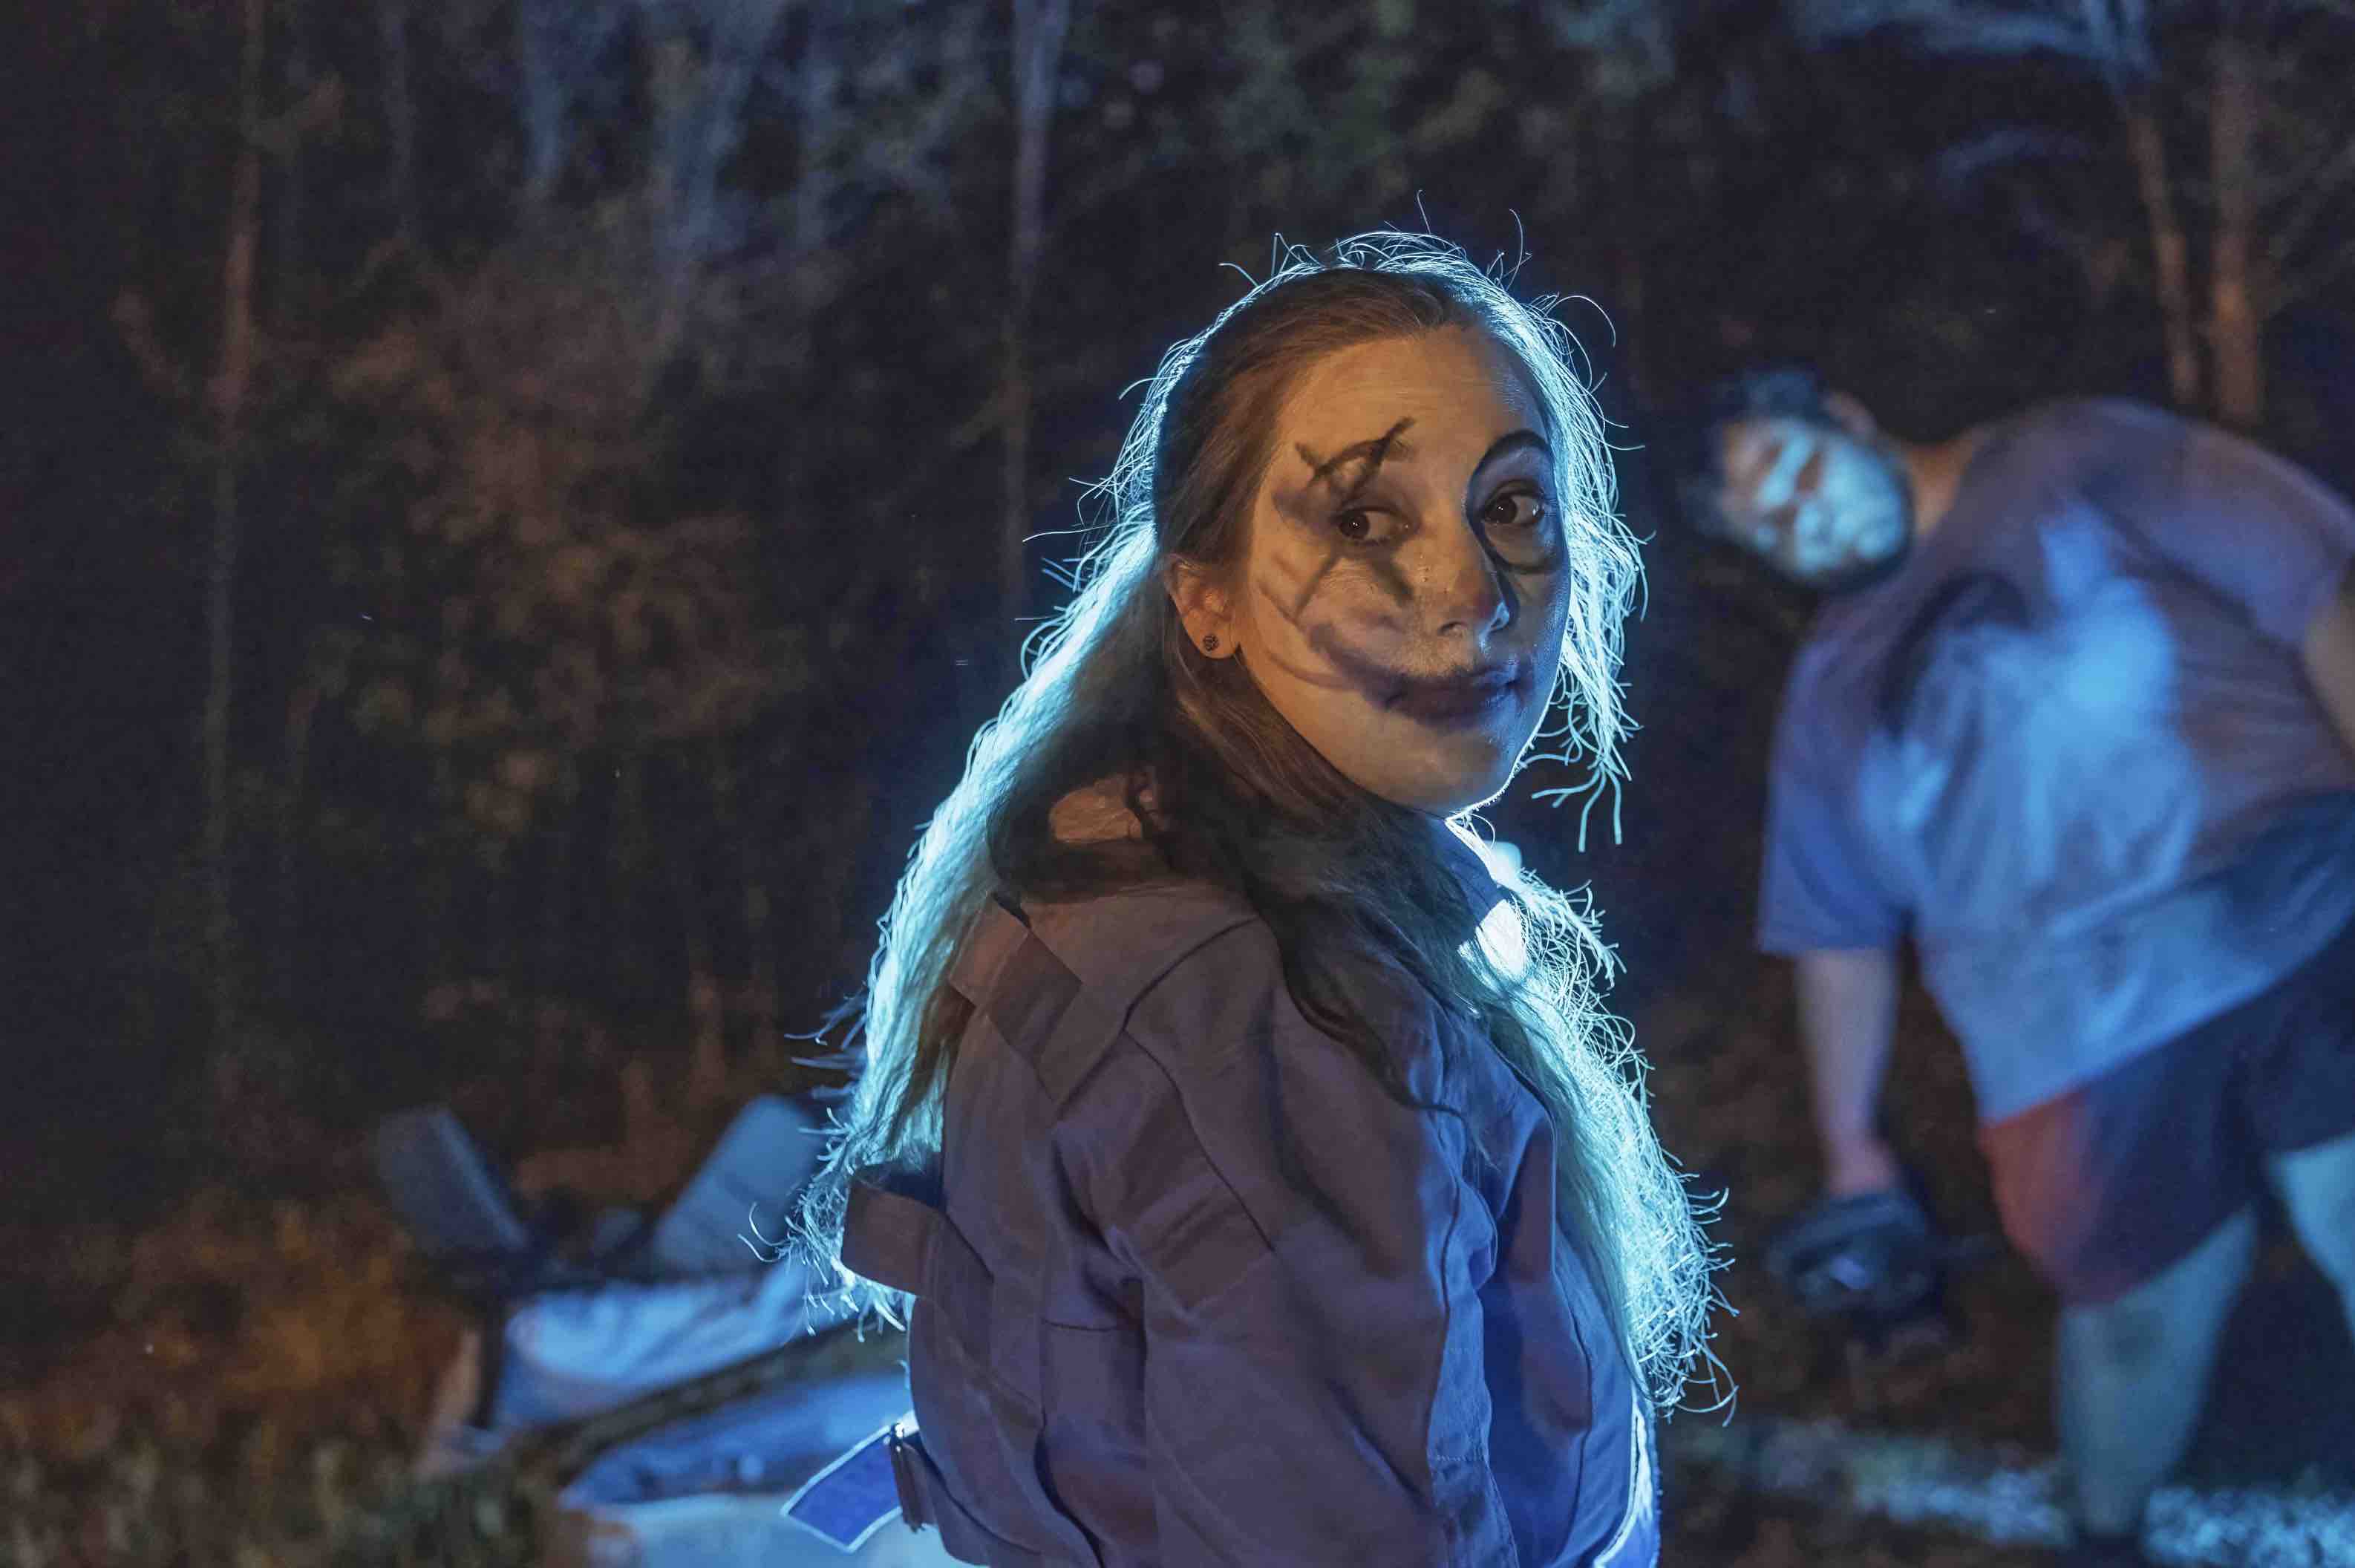 SMILE (2022) Deranged killers horror film preview with trailer - Page 2